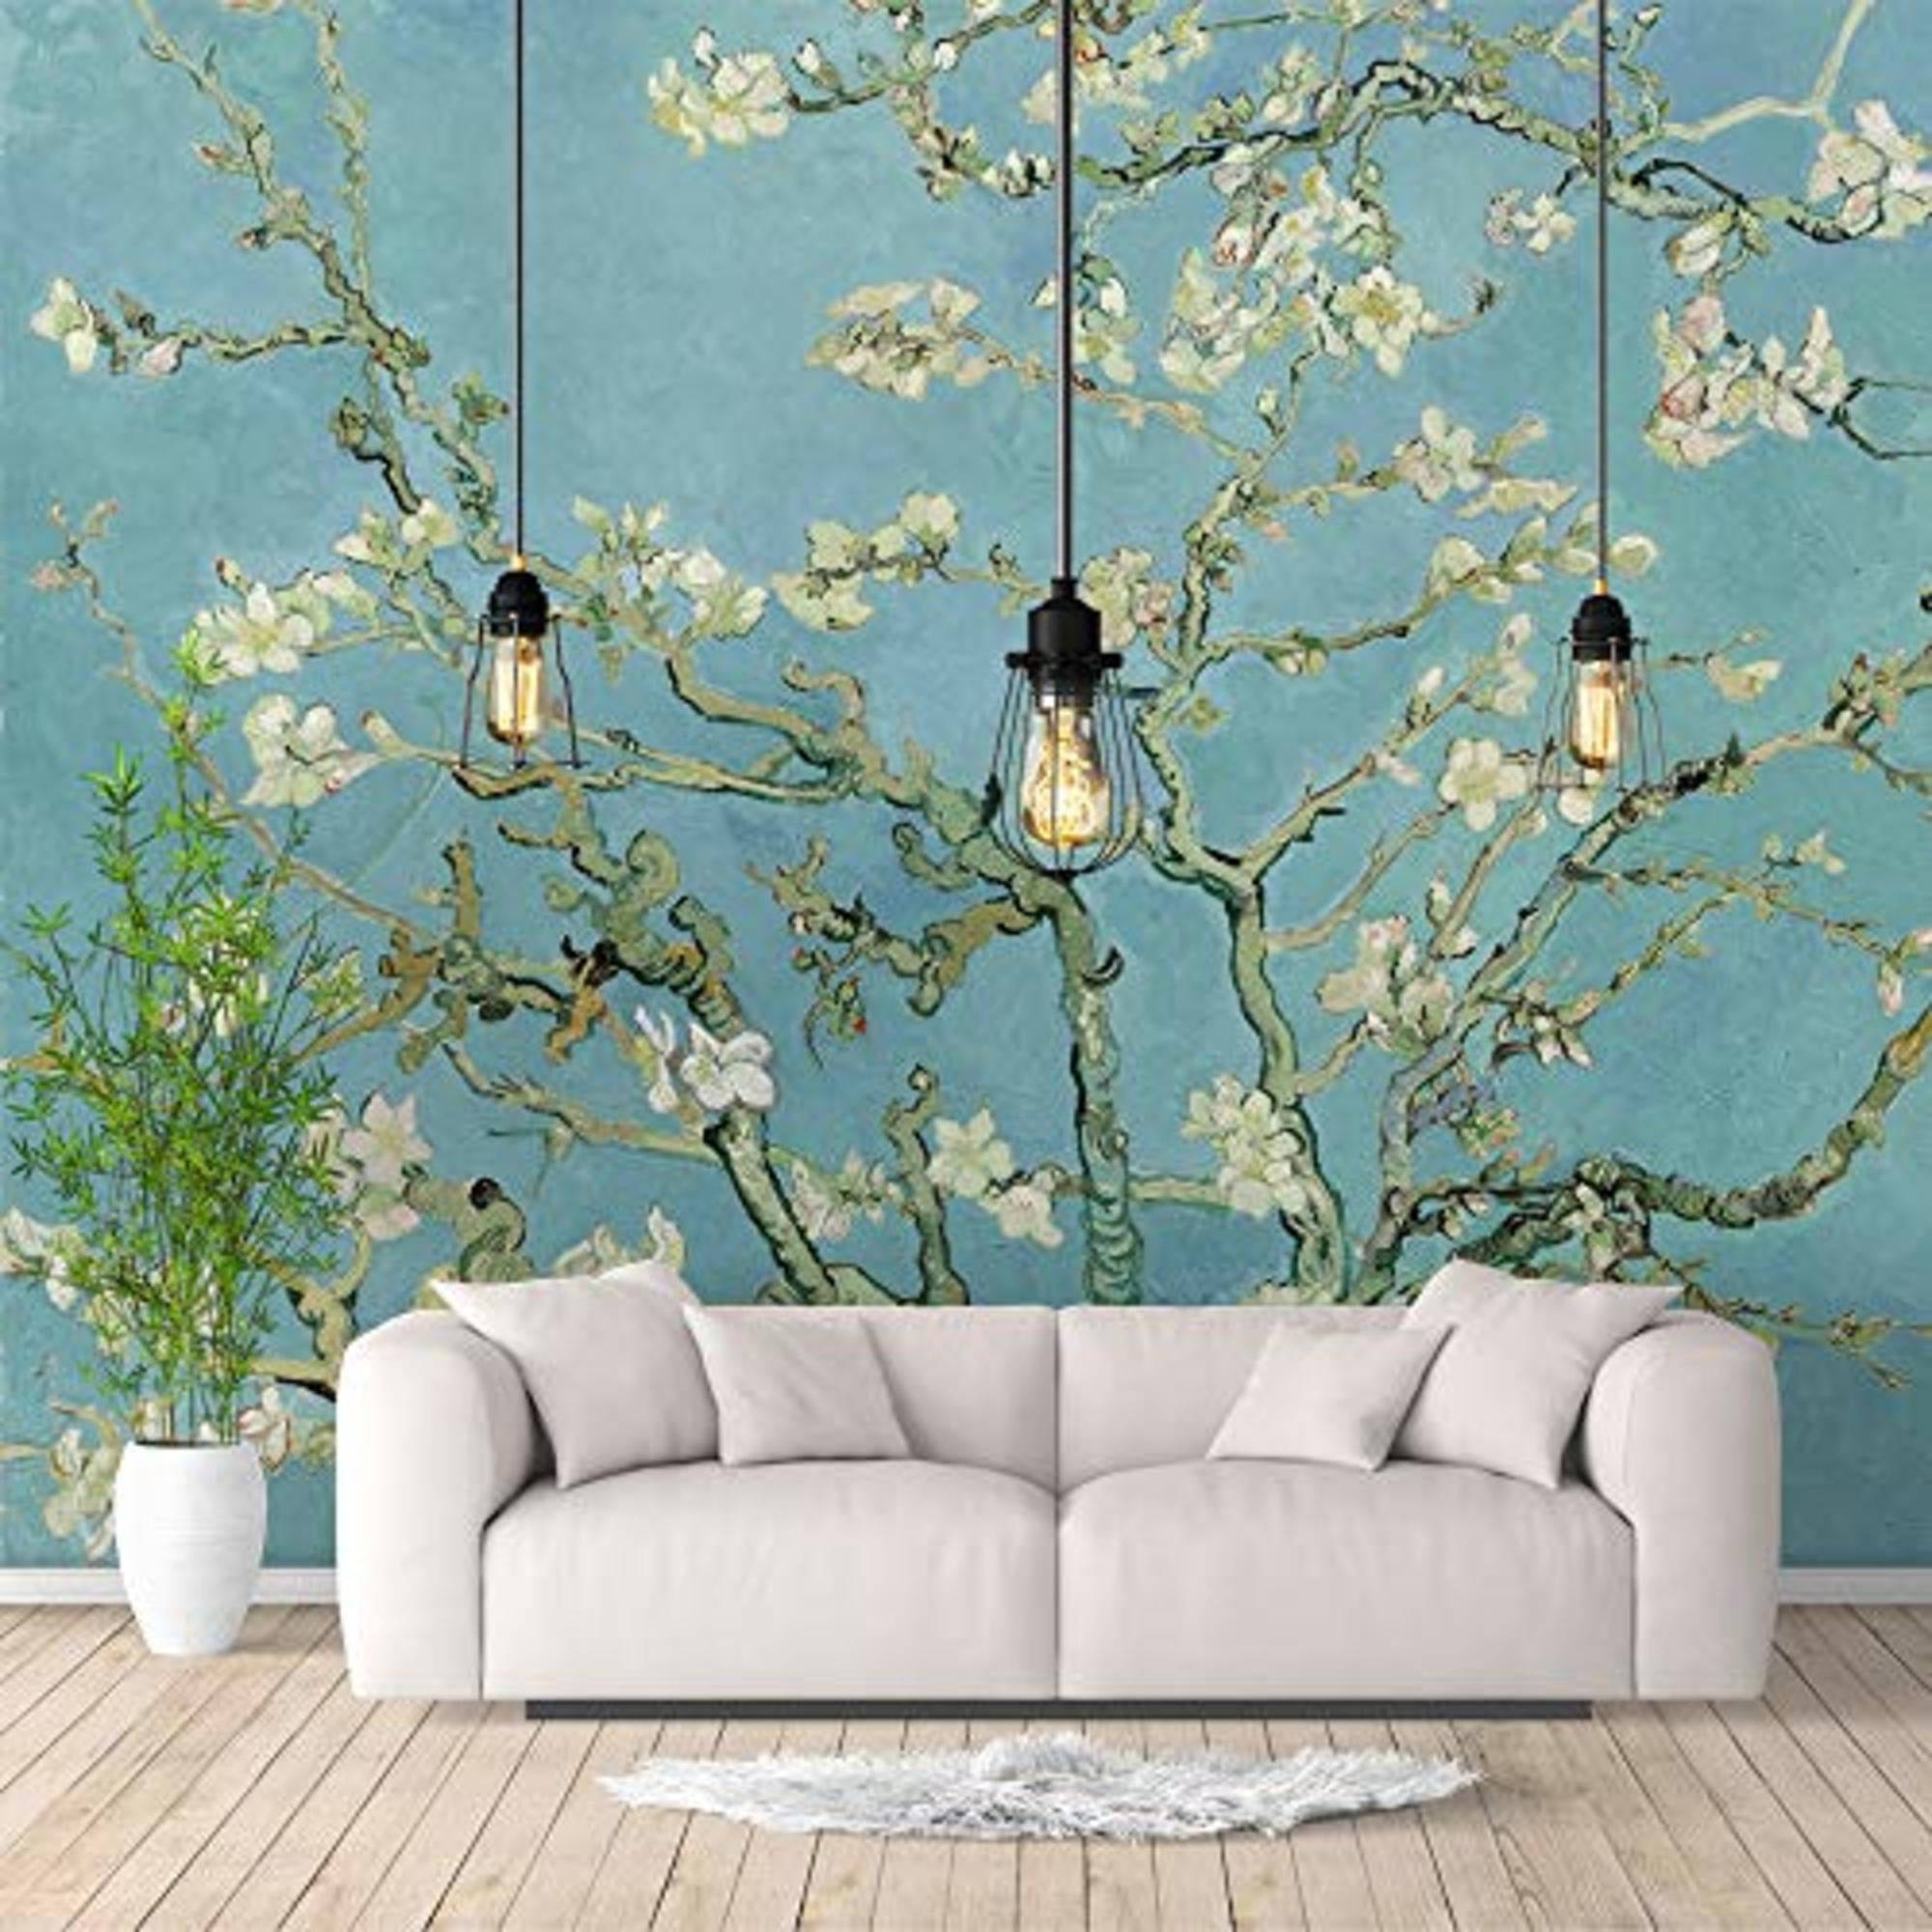 IDEA4WALL 4pcs Green Almond Blossom by Van Gogh Wallpaper Peel and Stick  Large Wall Stickers for Wall Decal - 66x96 inches 